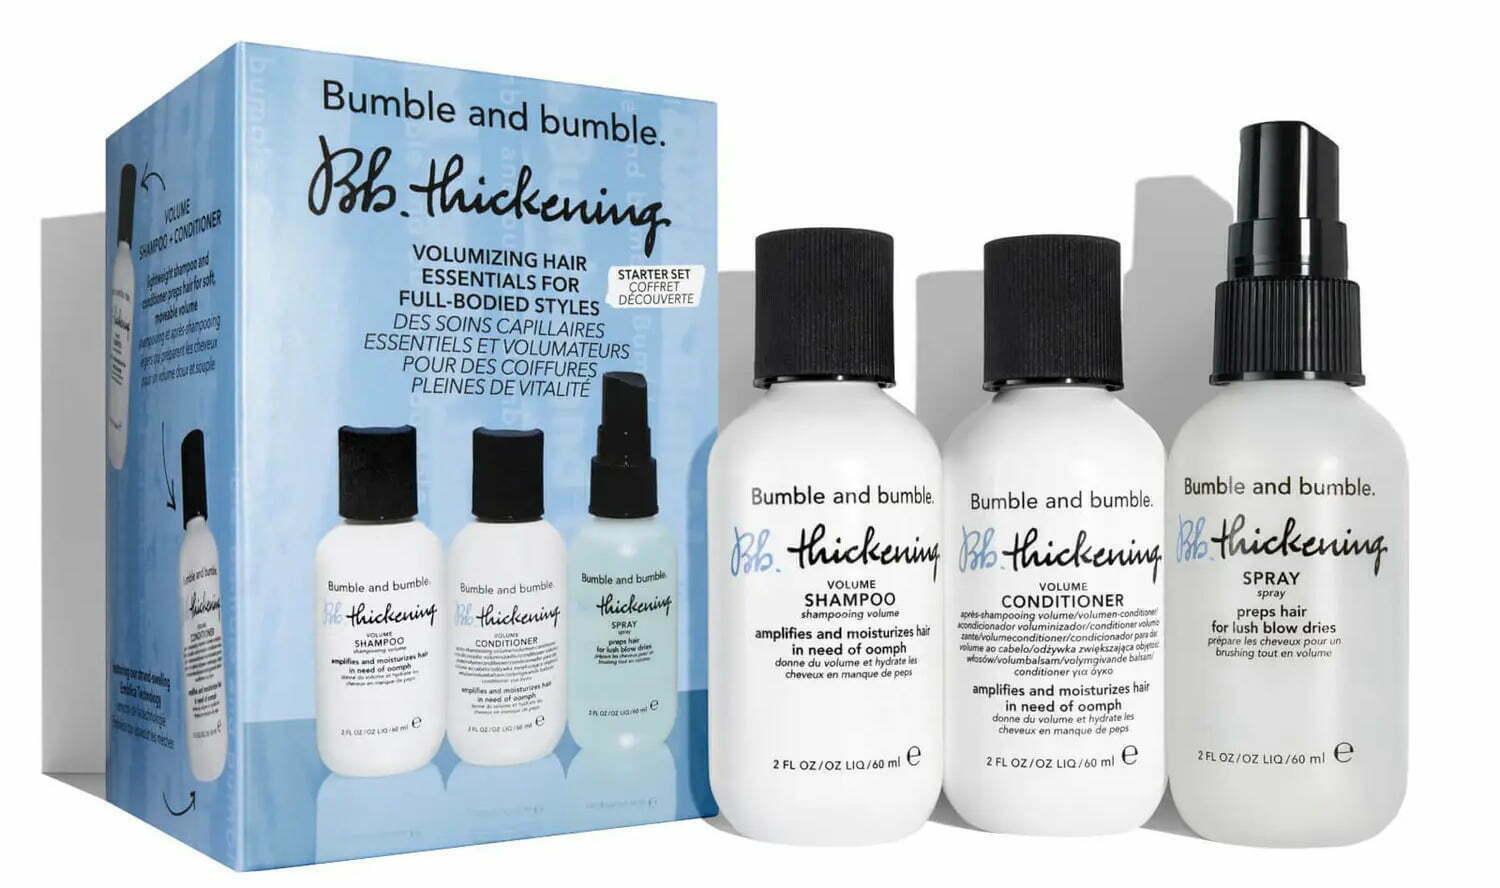 40% off Bumble and bumble Thickening Trial Set